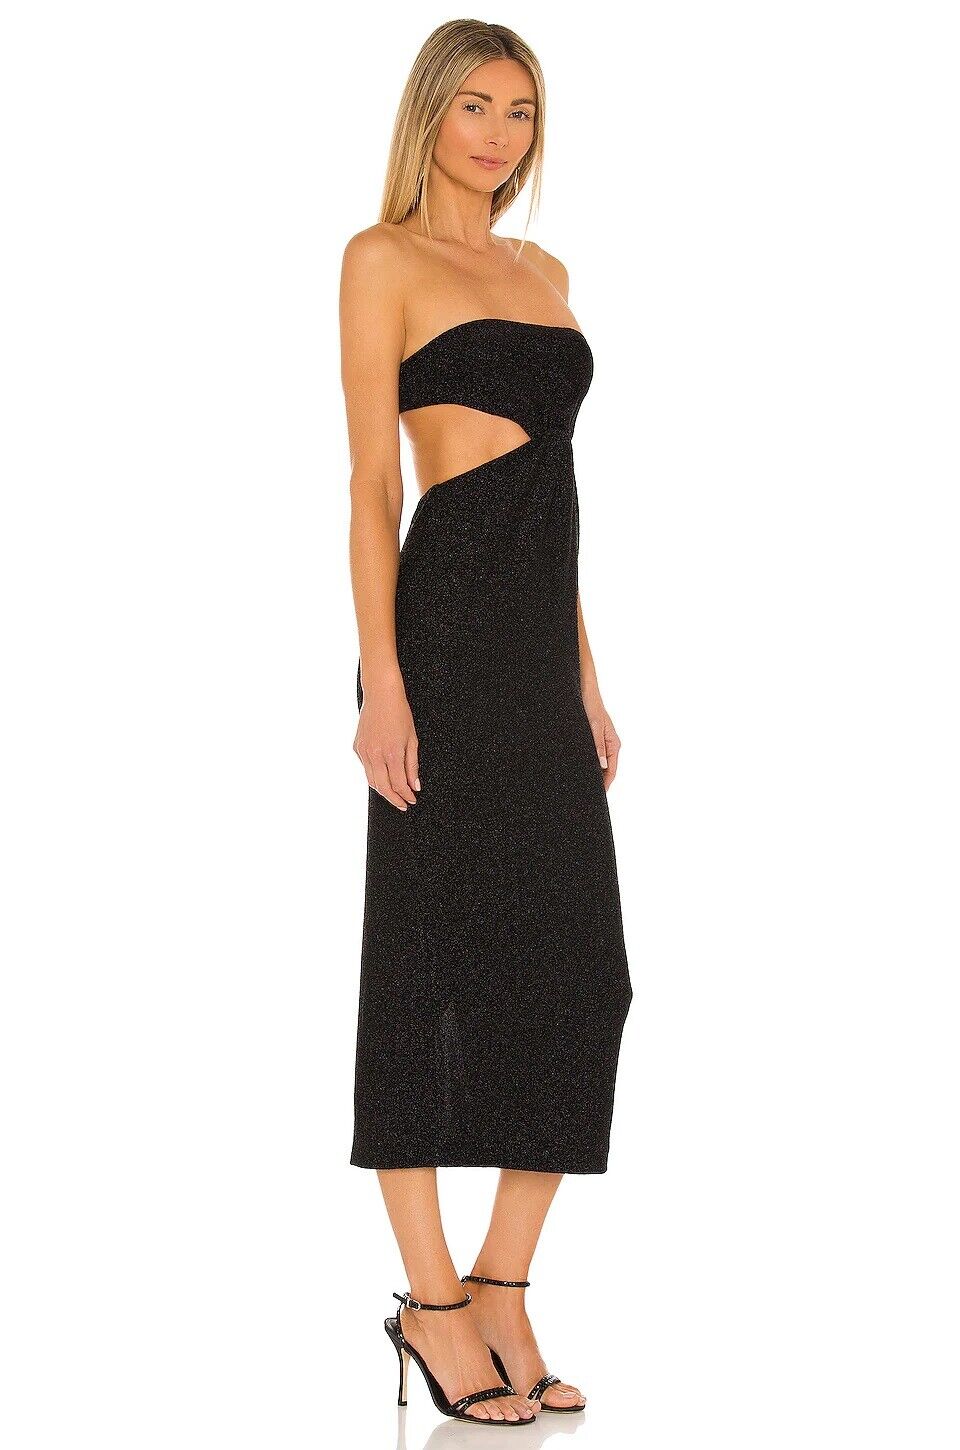 Natalie Rolt Olympia Dress in Black - size 0